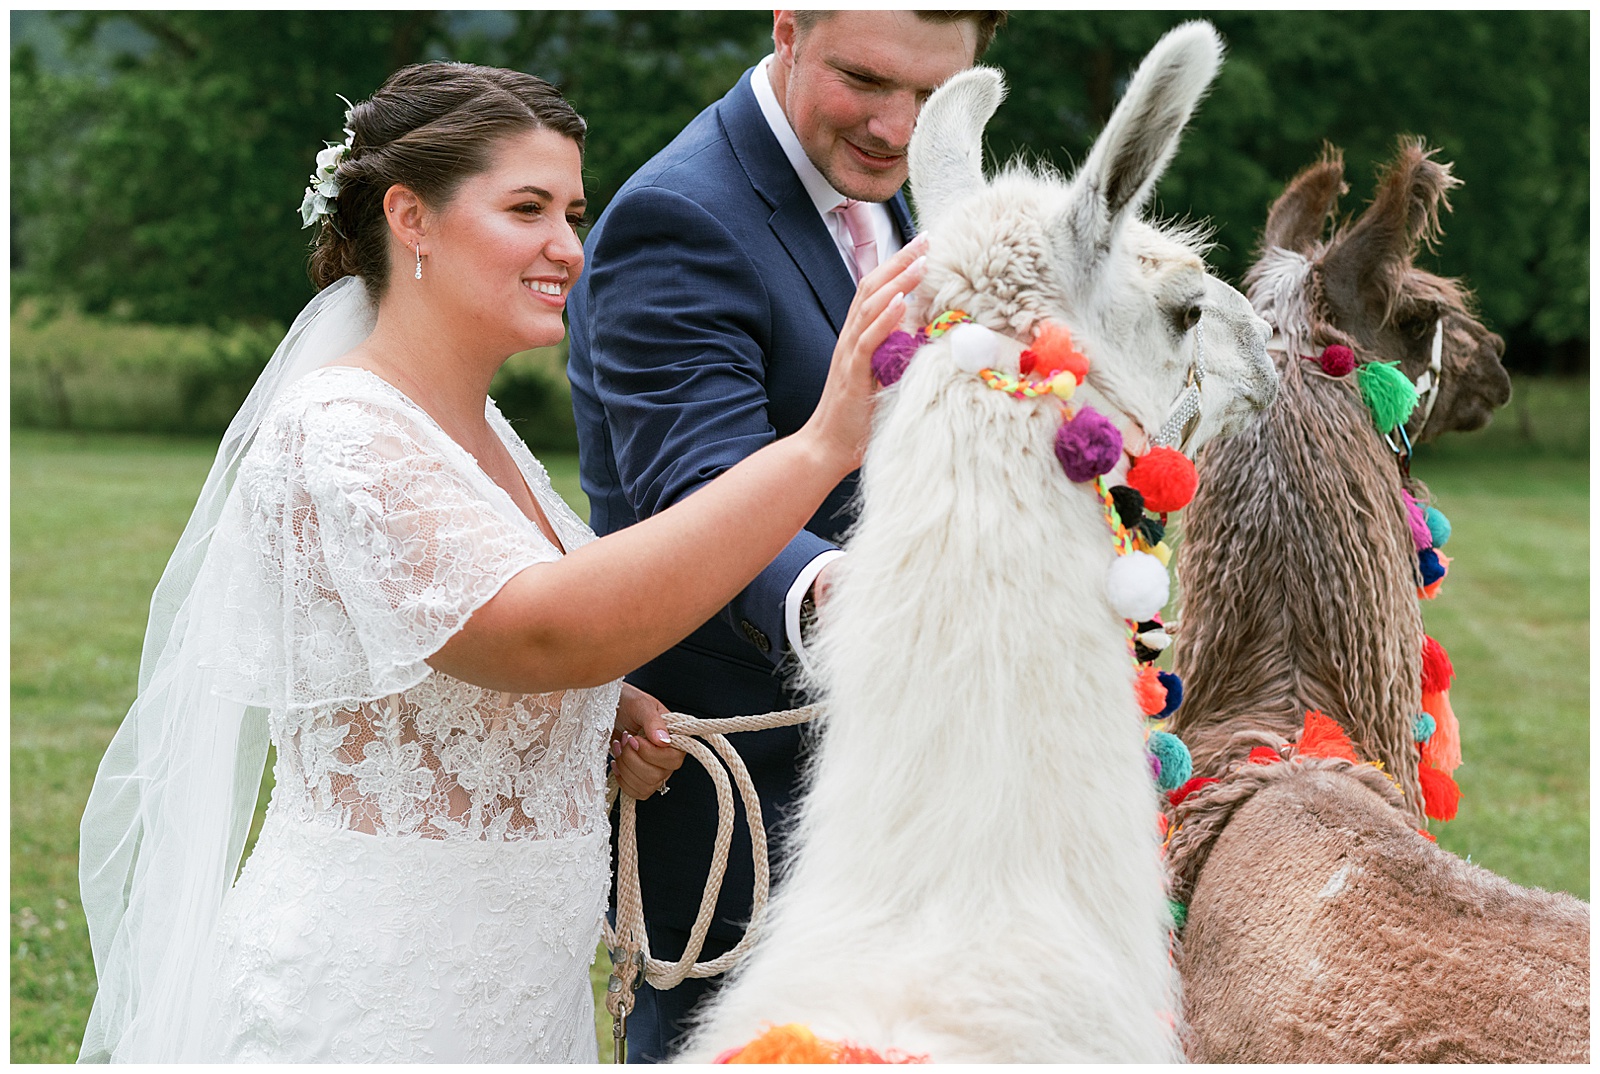 Llamas at a small outdoor wedding in East Tennessee Greenville in the mountains. Bride and groom walking with llamas. 